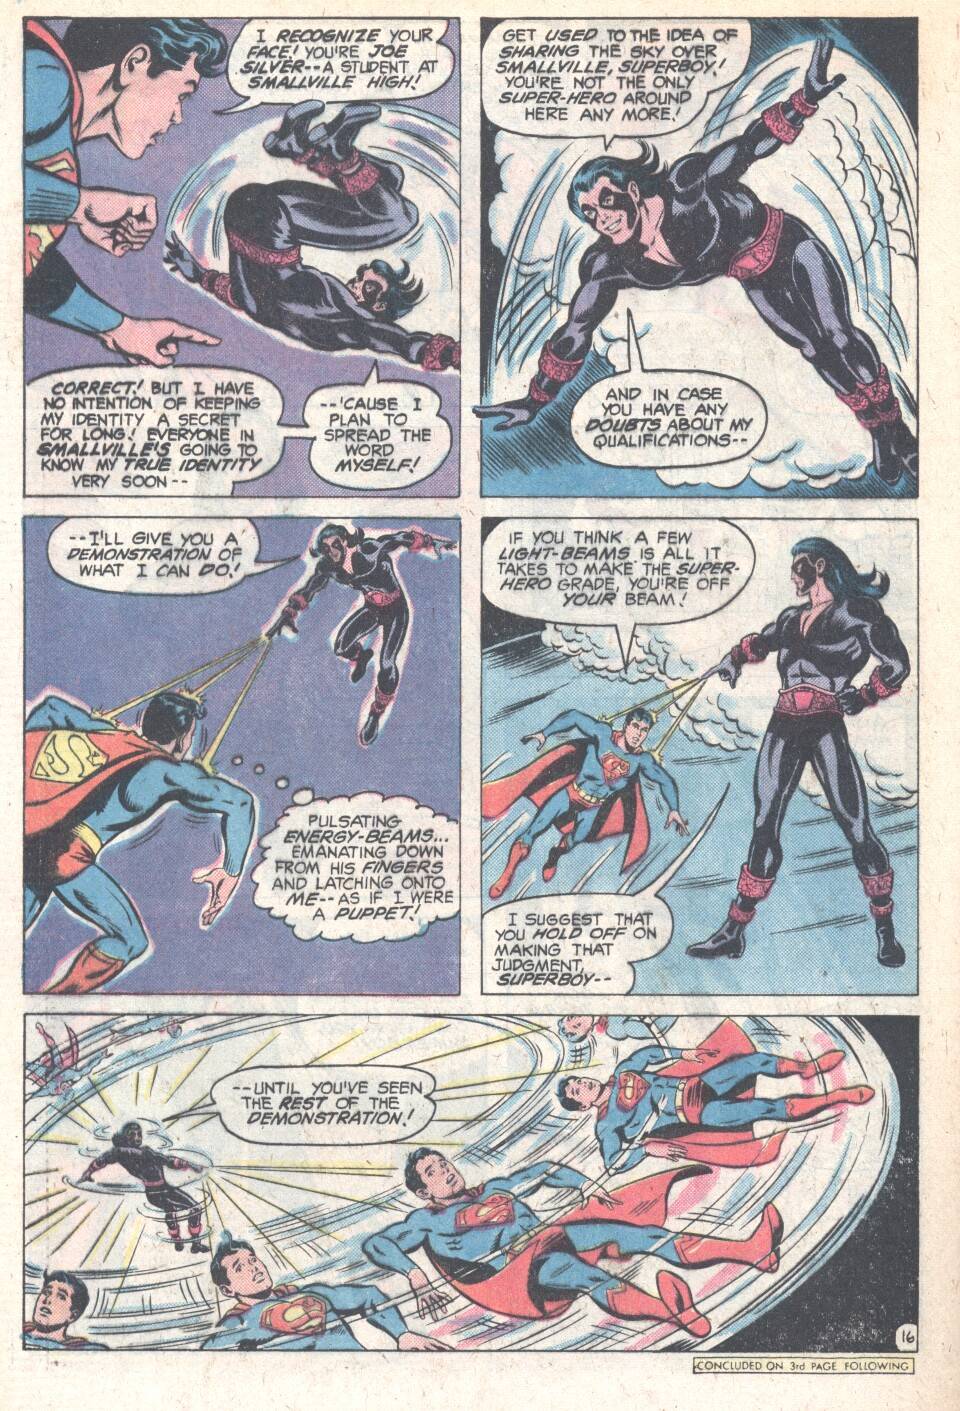 The New Adventures of Superboy 3 Page 16